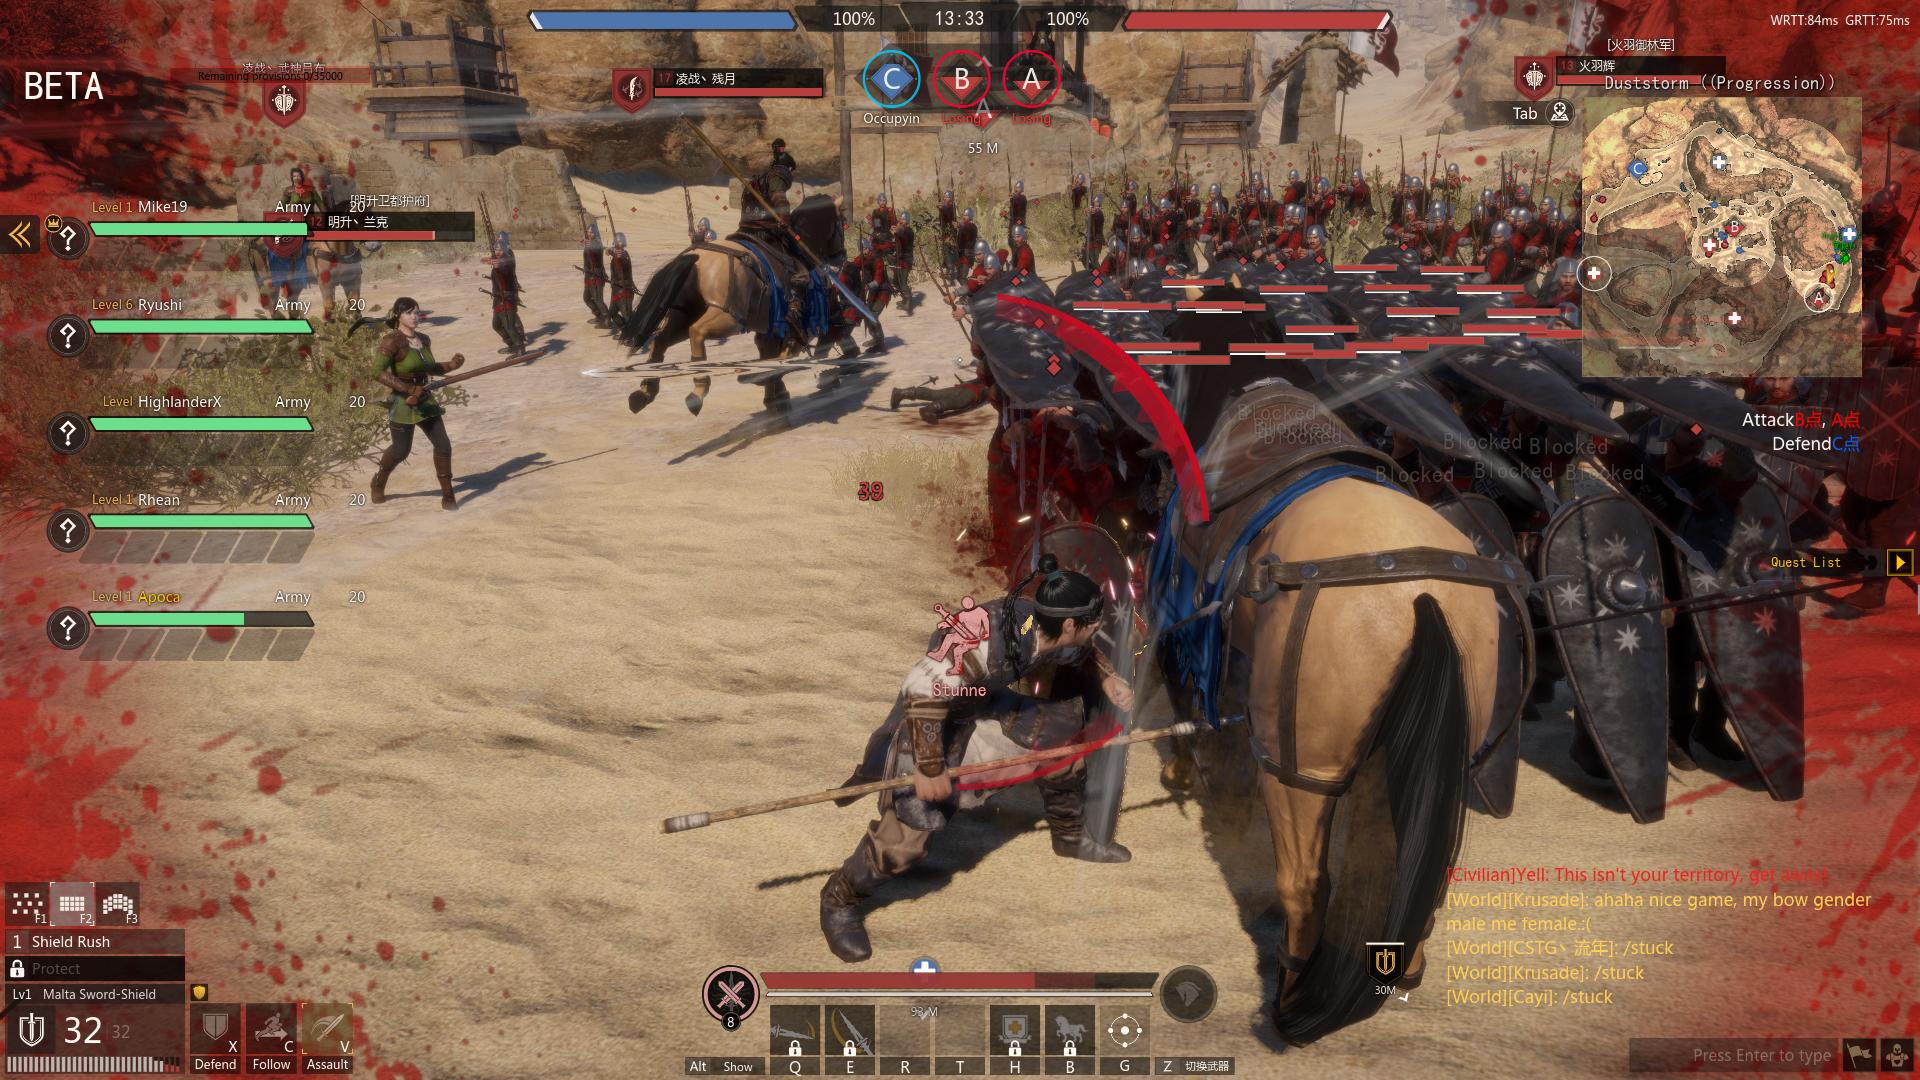 Conqueror S Blade Mount Blade Meets World Of Tanks Onrpg